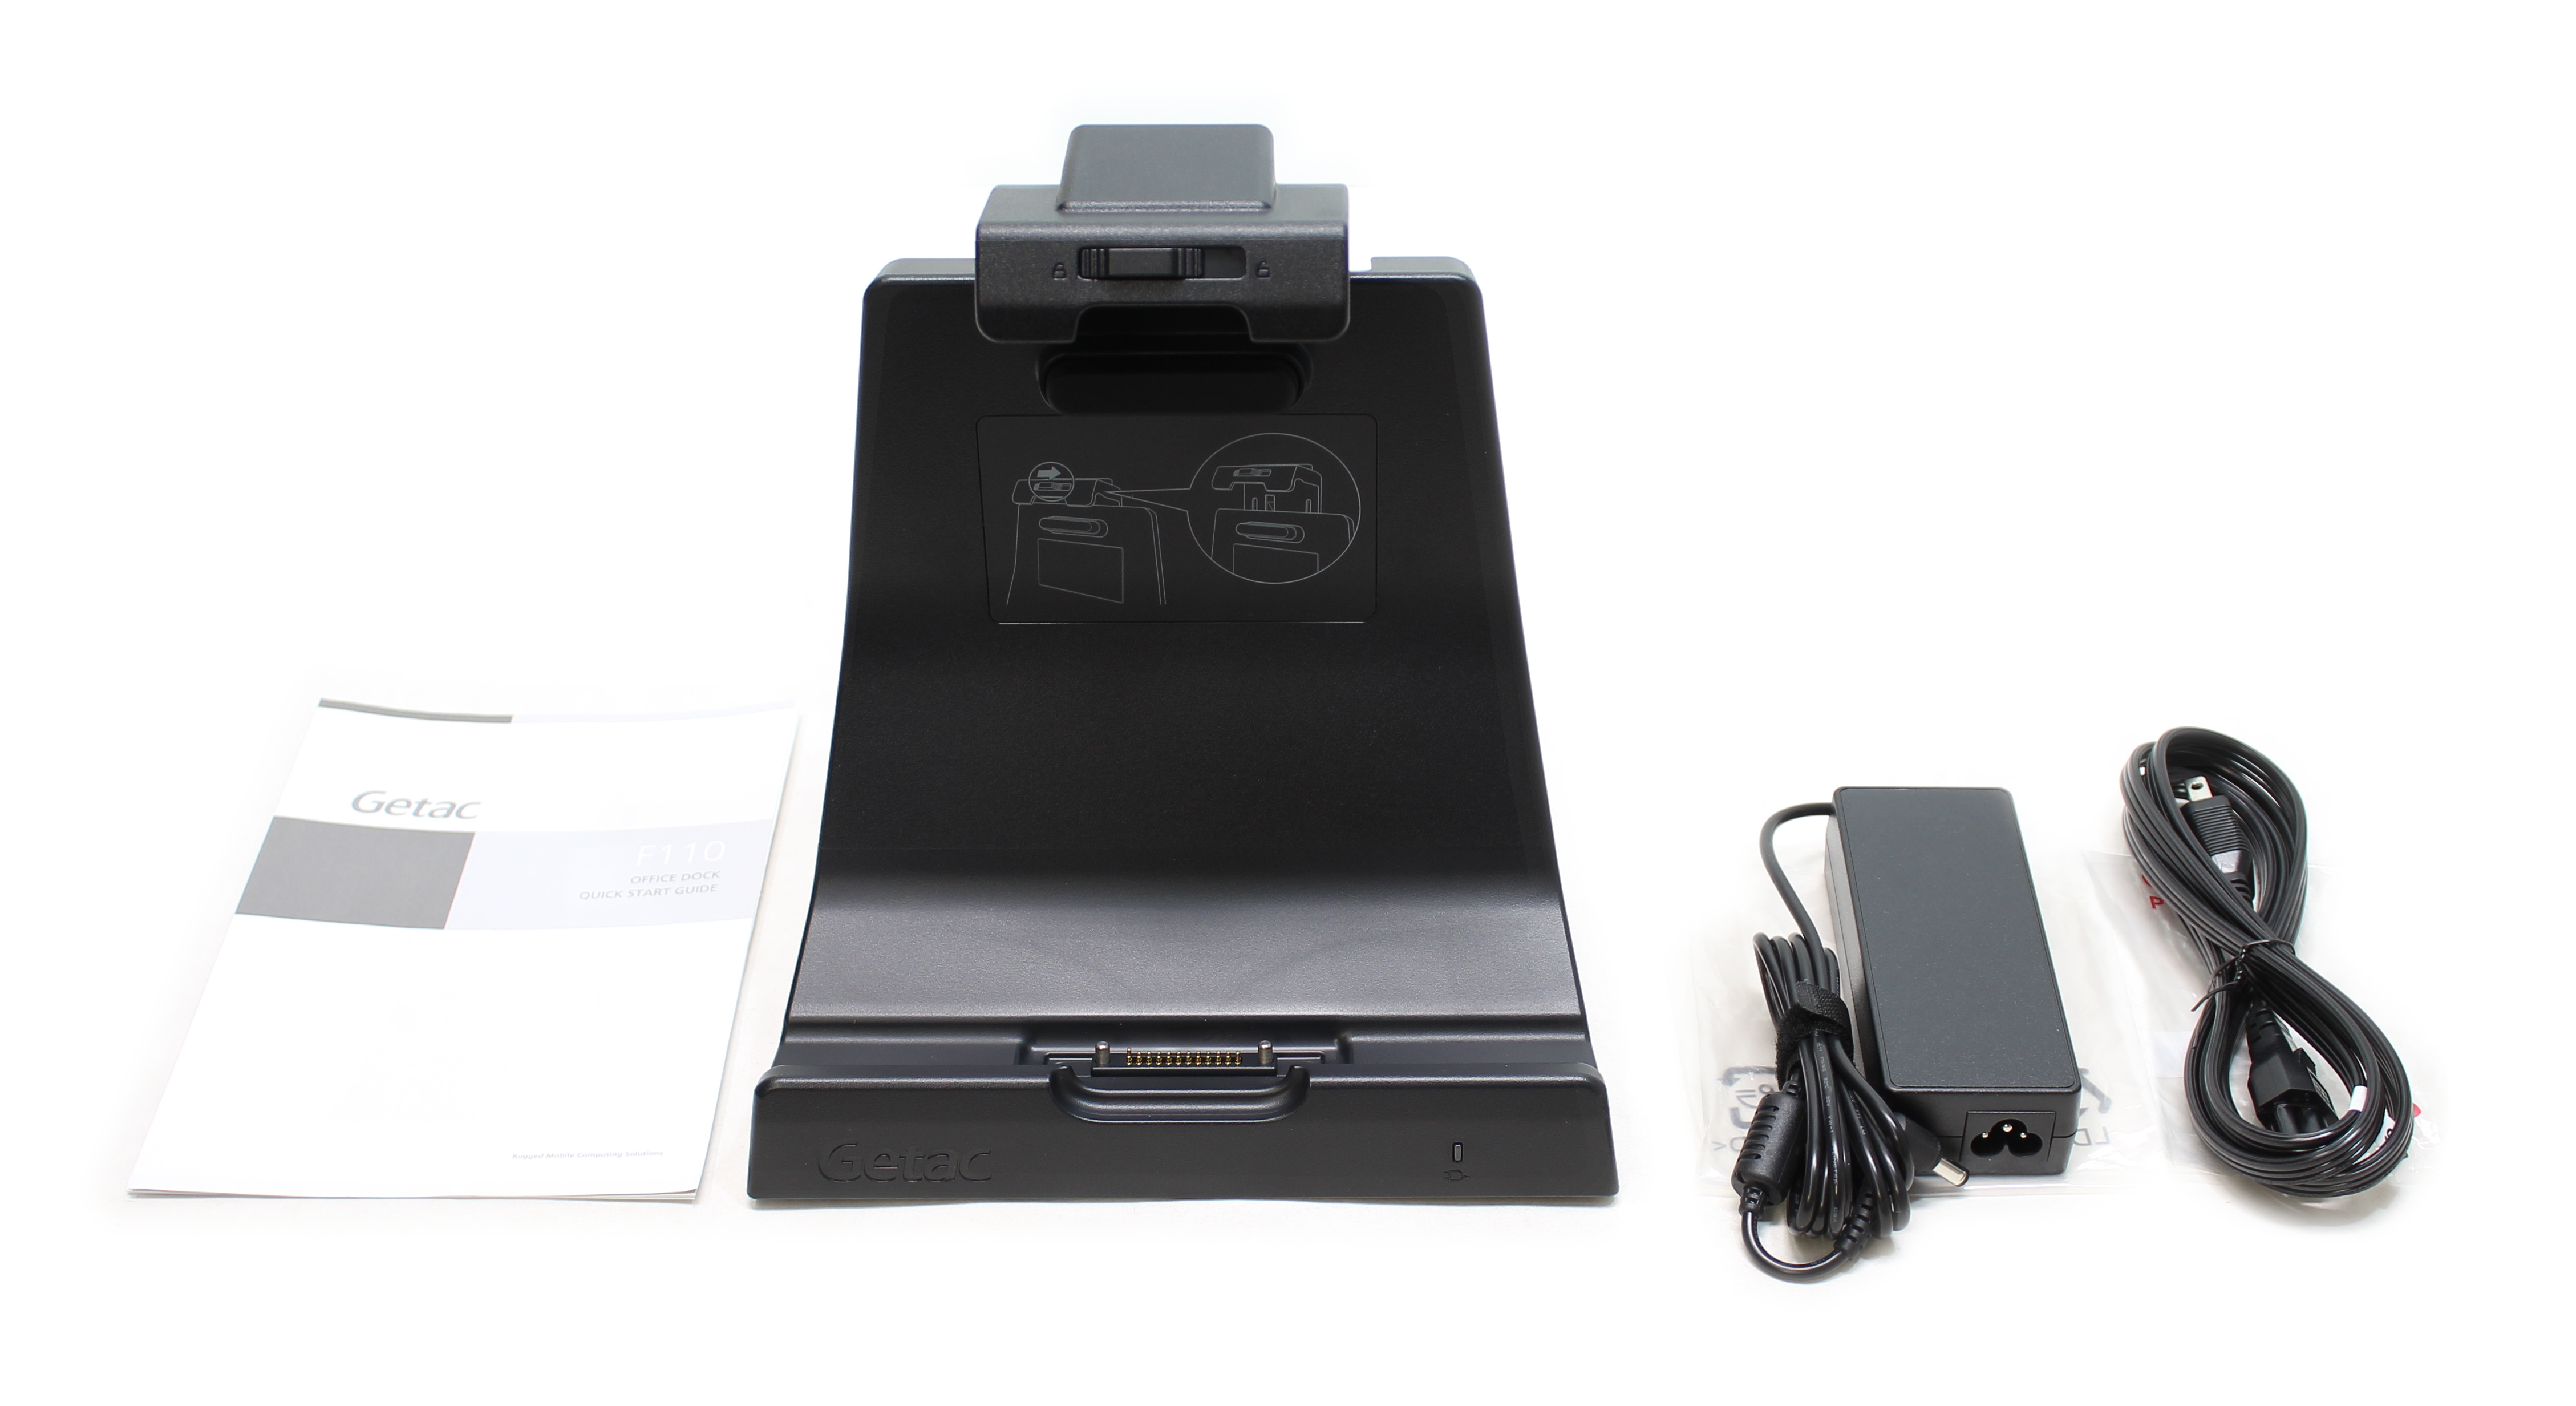 Getac F110 Office Dock Station With AC Adapter GDOFU5